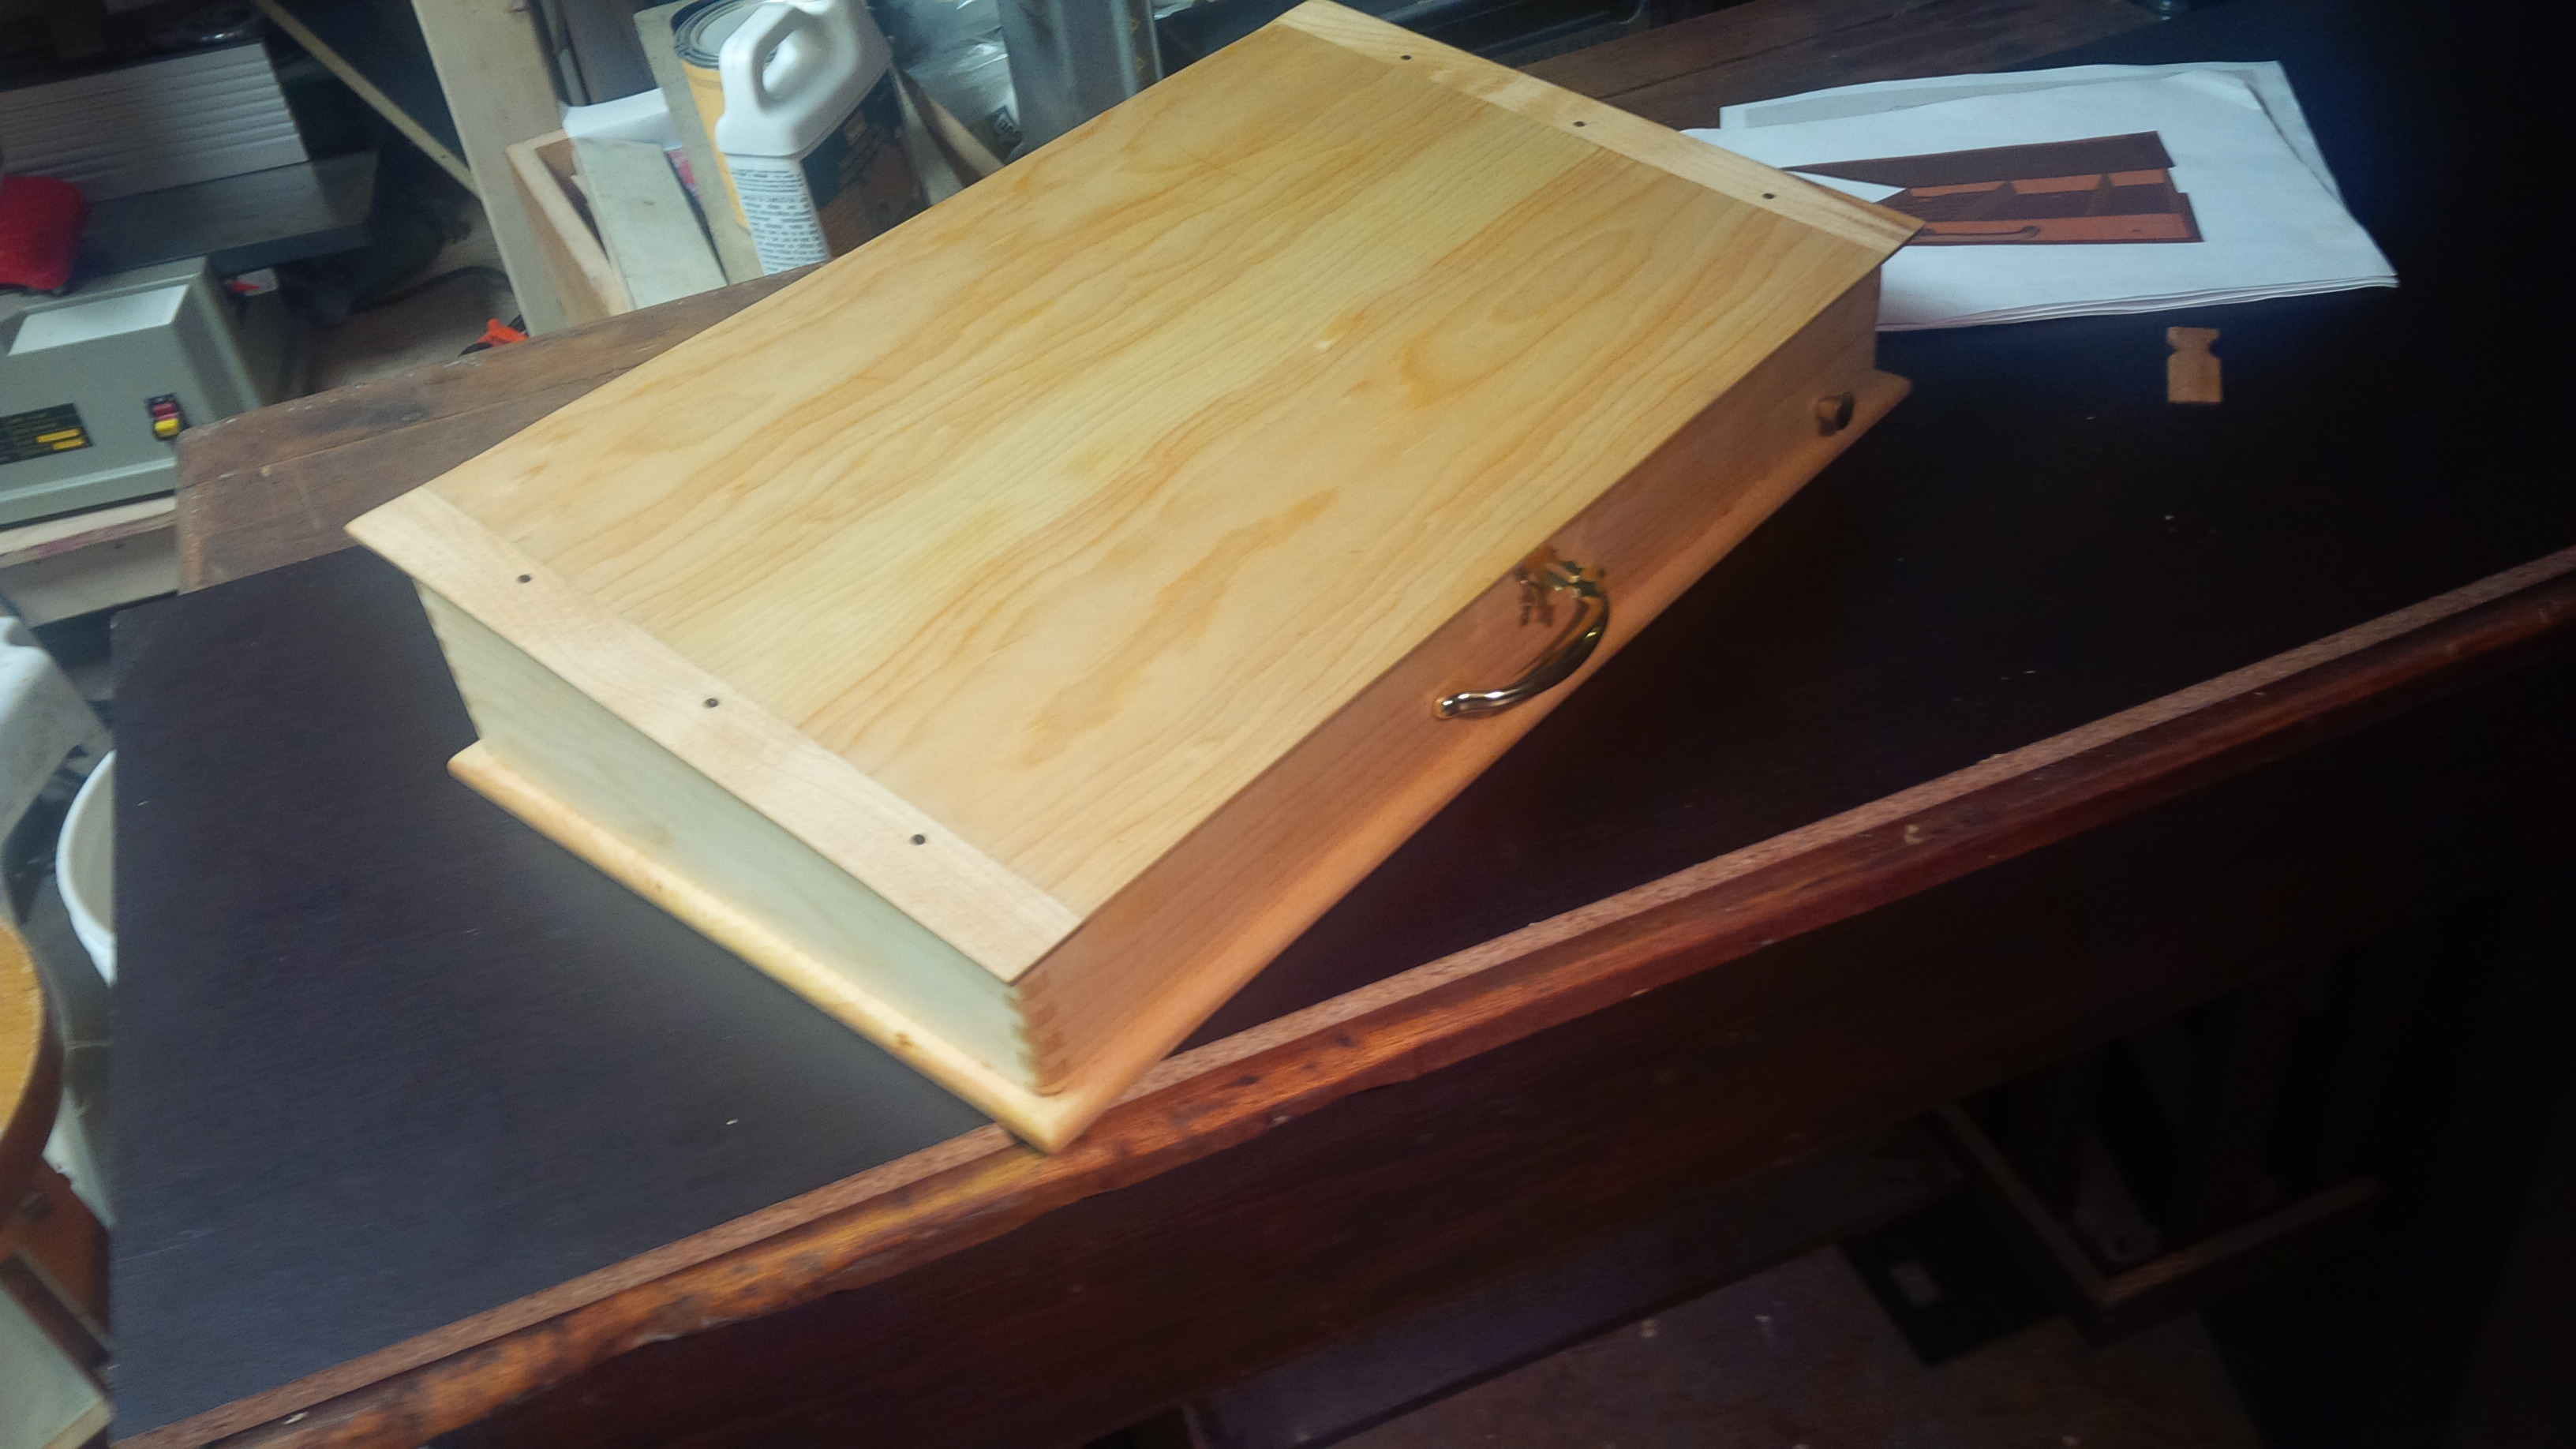 Artist's Laptop Case - this one in pine with maple breadboard ends and padouak dowels. It will also be available in cherry with walnut breadboard ends.